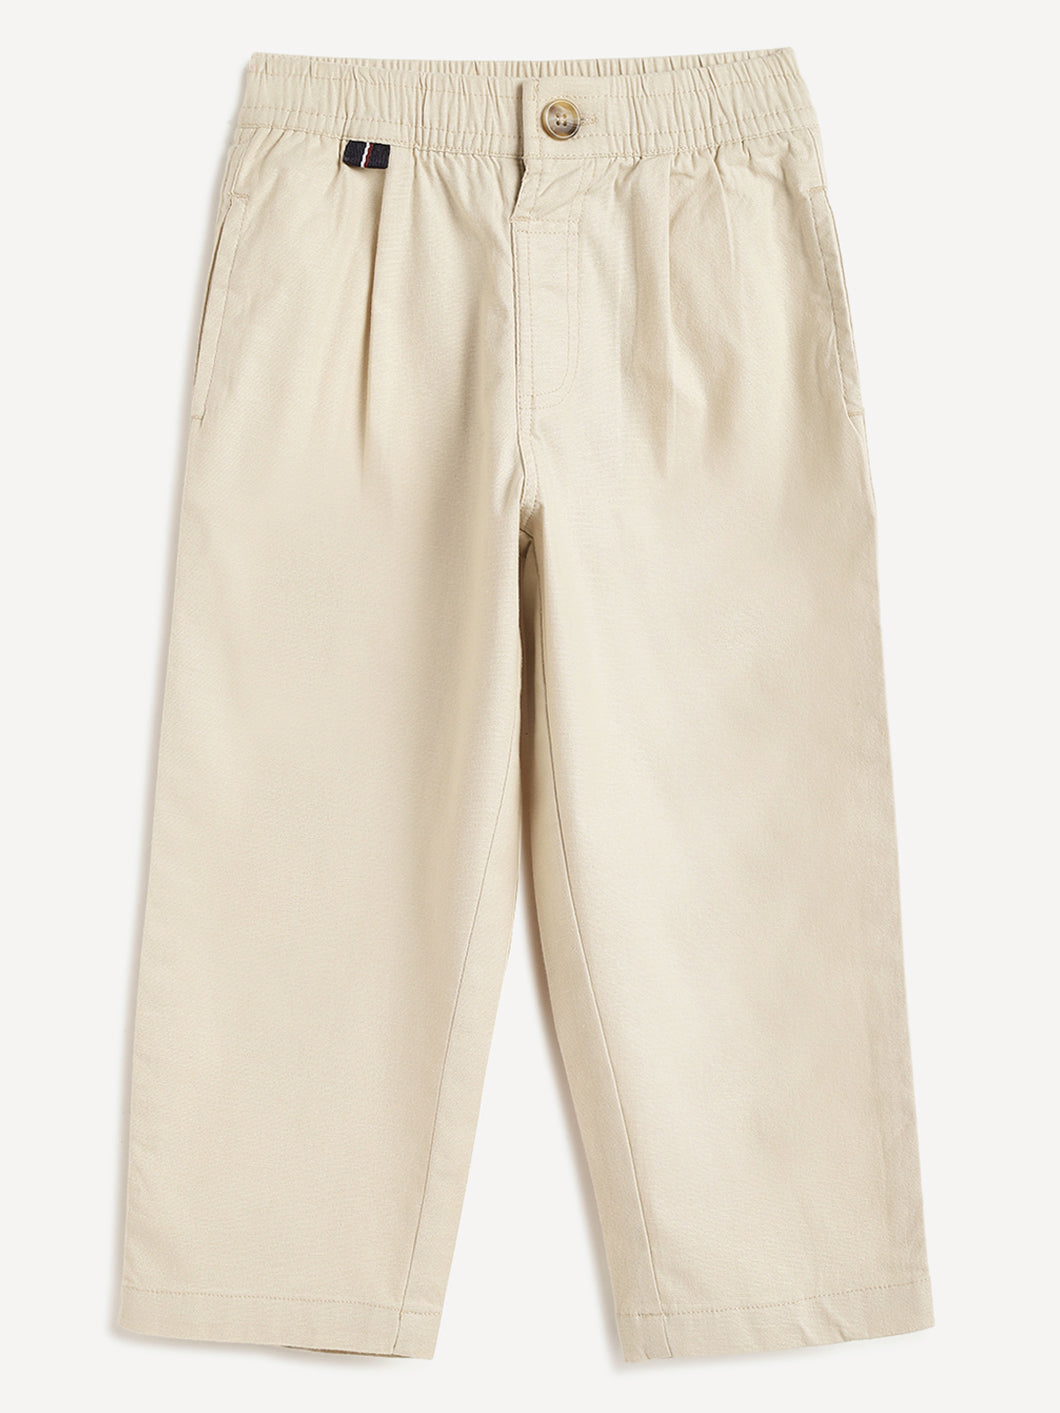 Campana Boys Hugo Cotton-Lycra Relax Fit Pull-on Pants - Beige